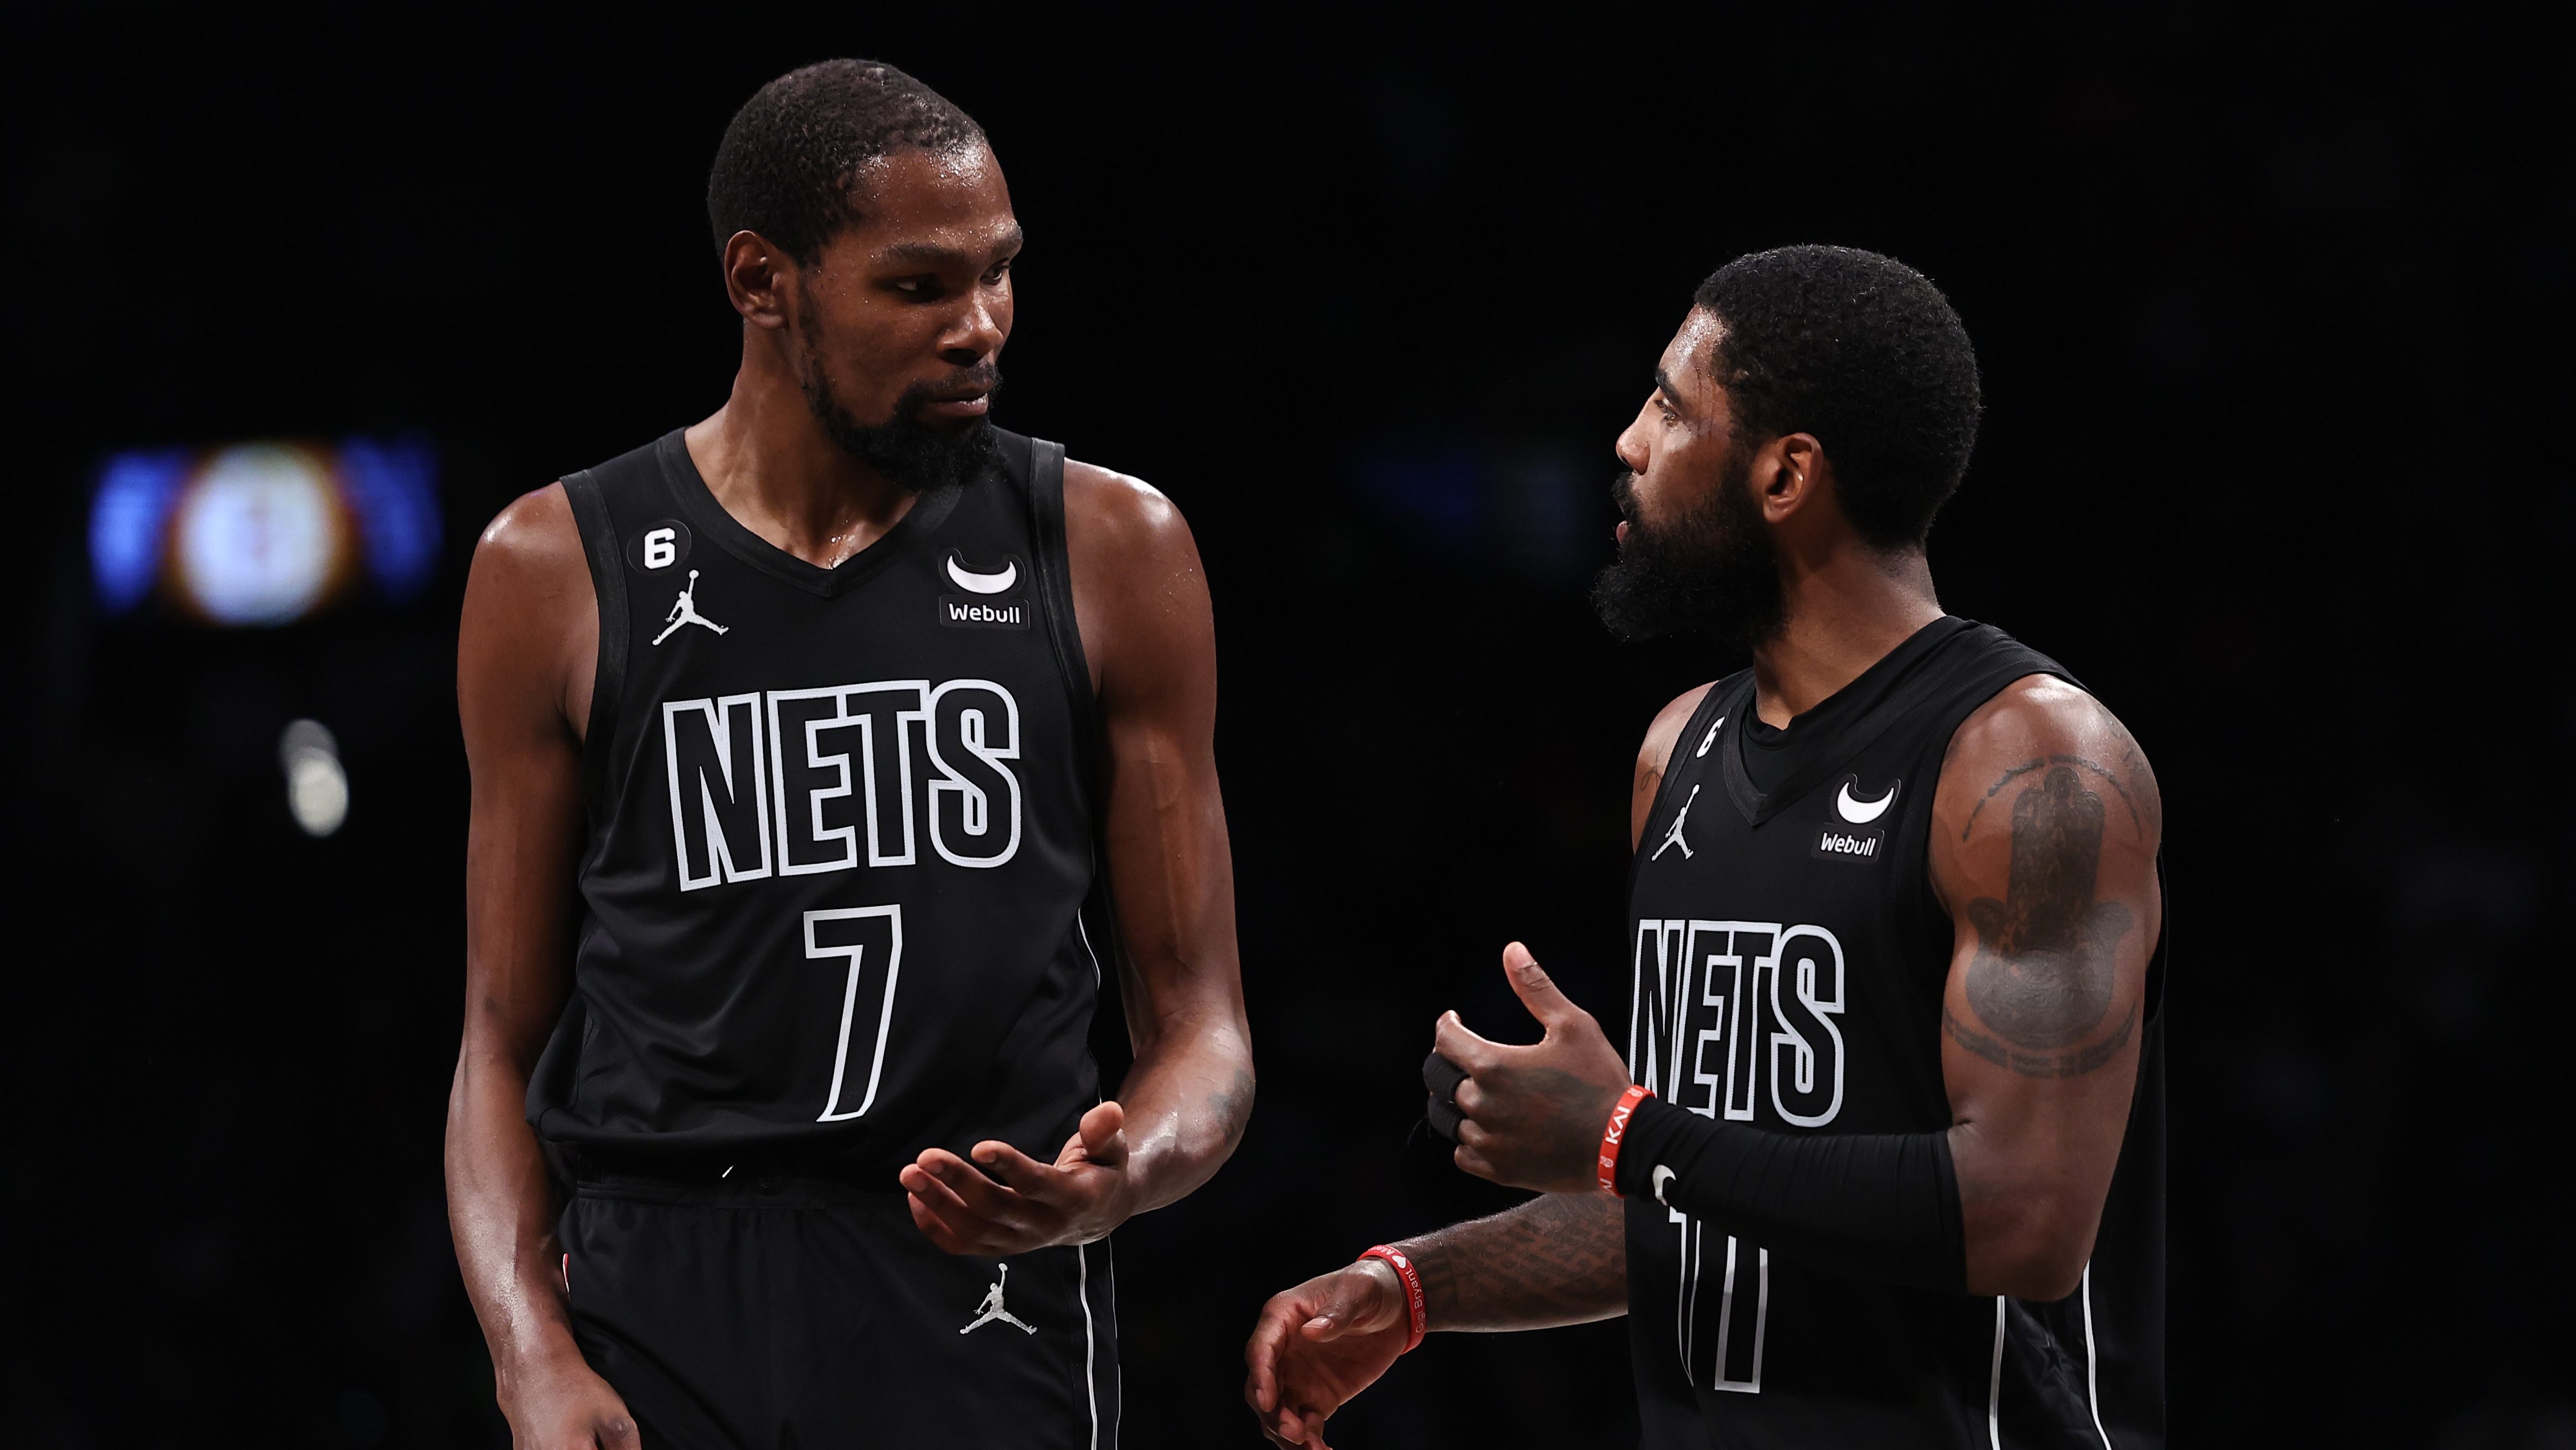 Little brother no more: Kyrie Irving, Kevin Durant are Brooklyn Nets